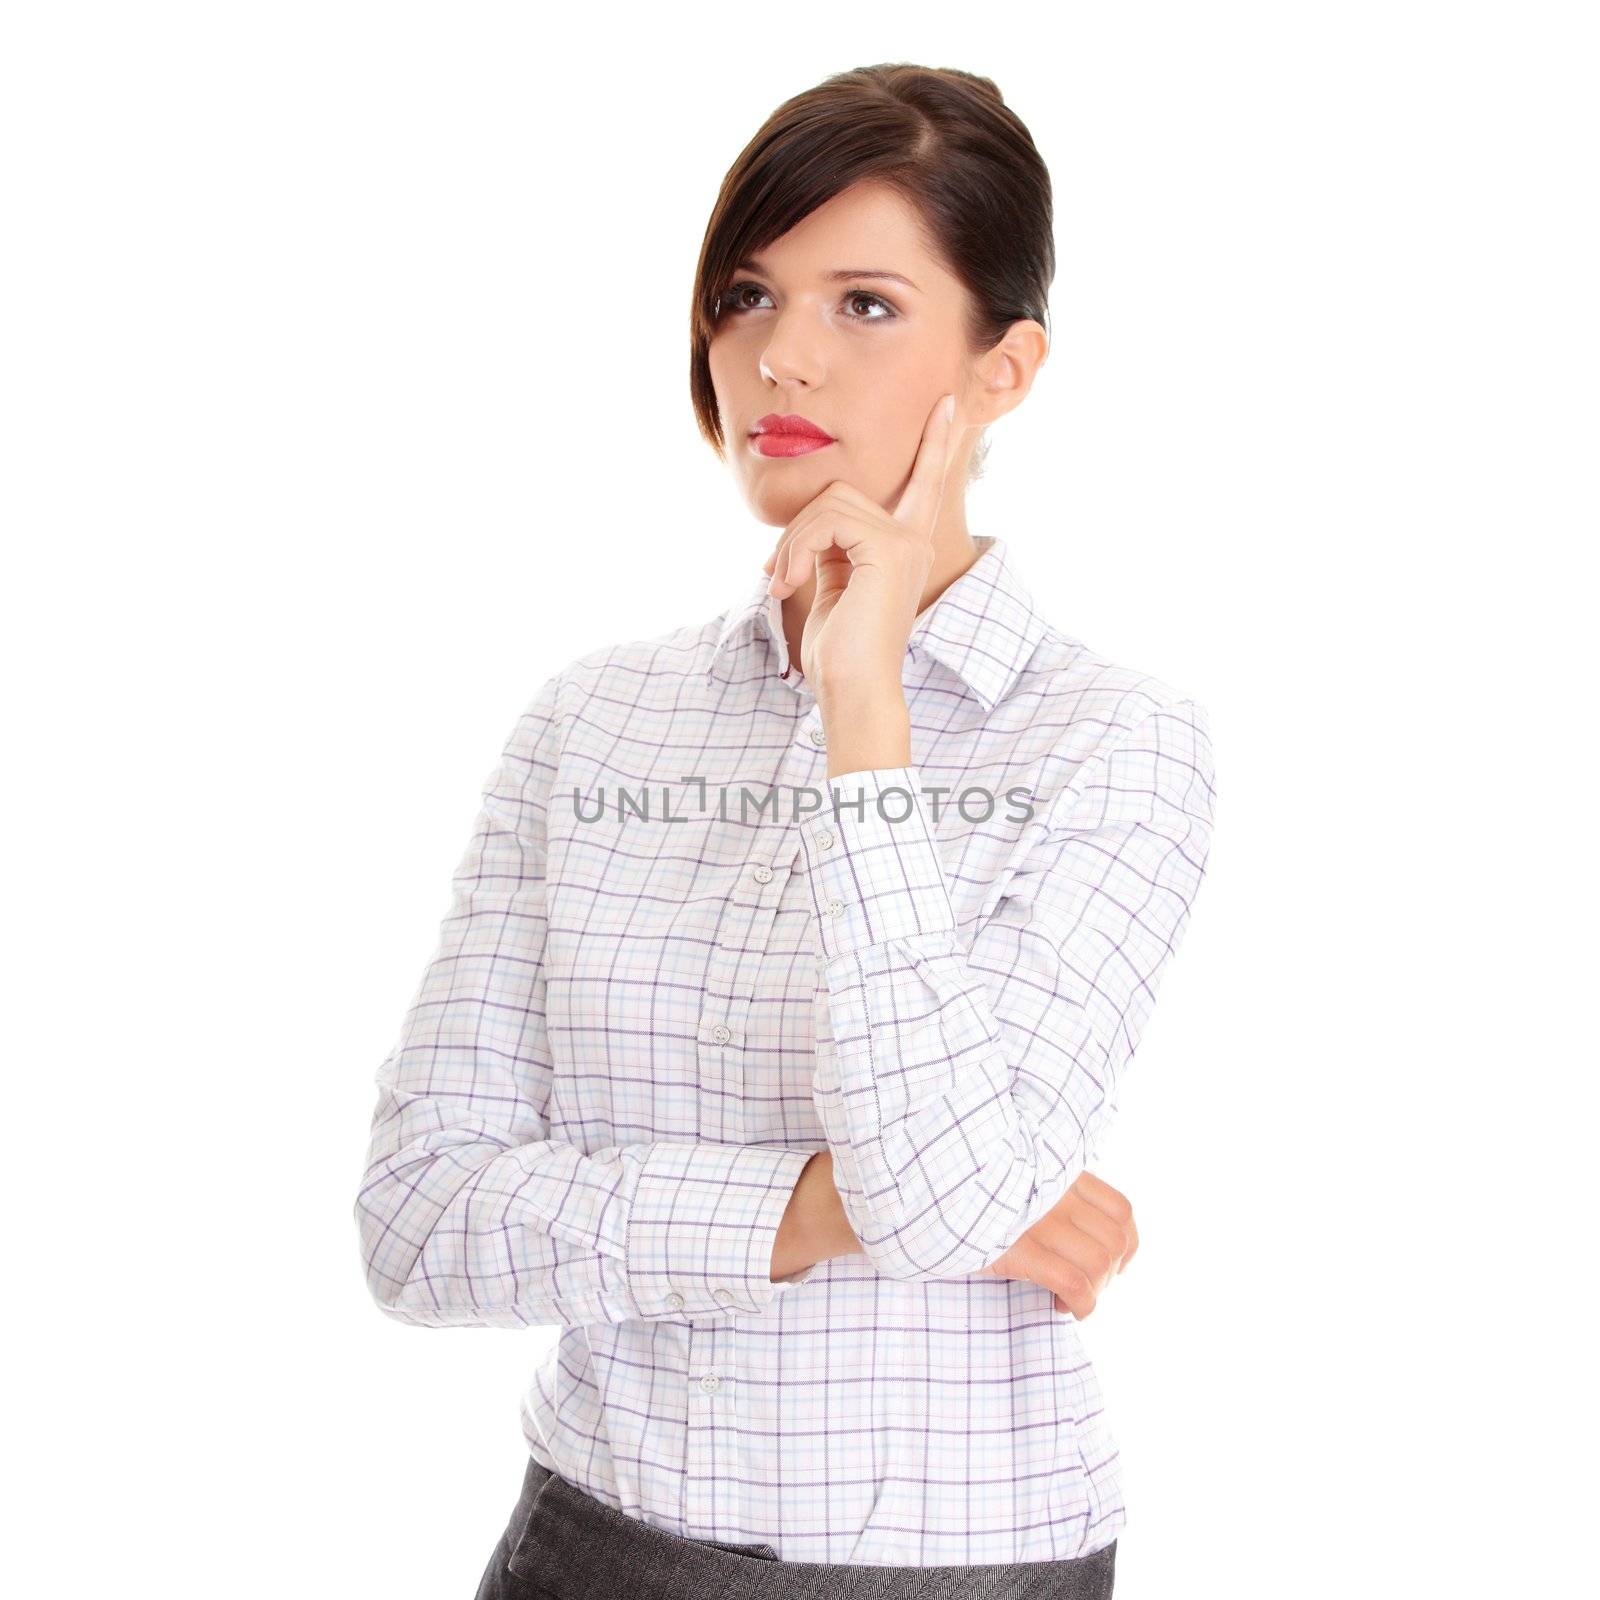 Thoughtful business woman by BDS